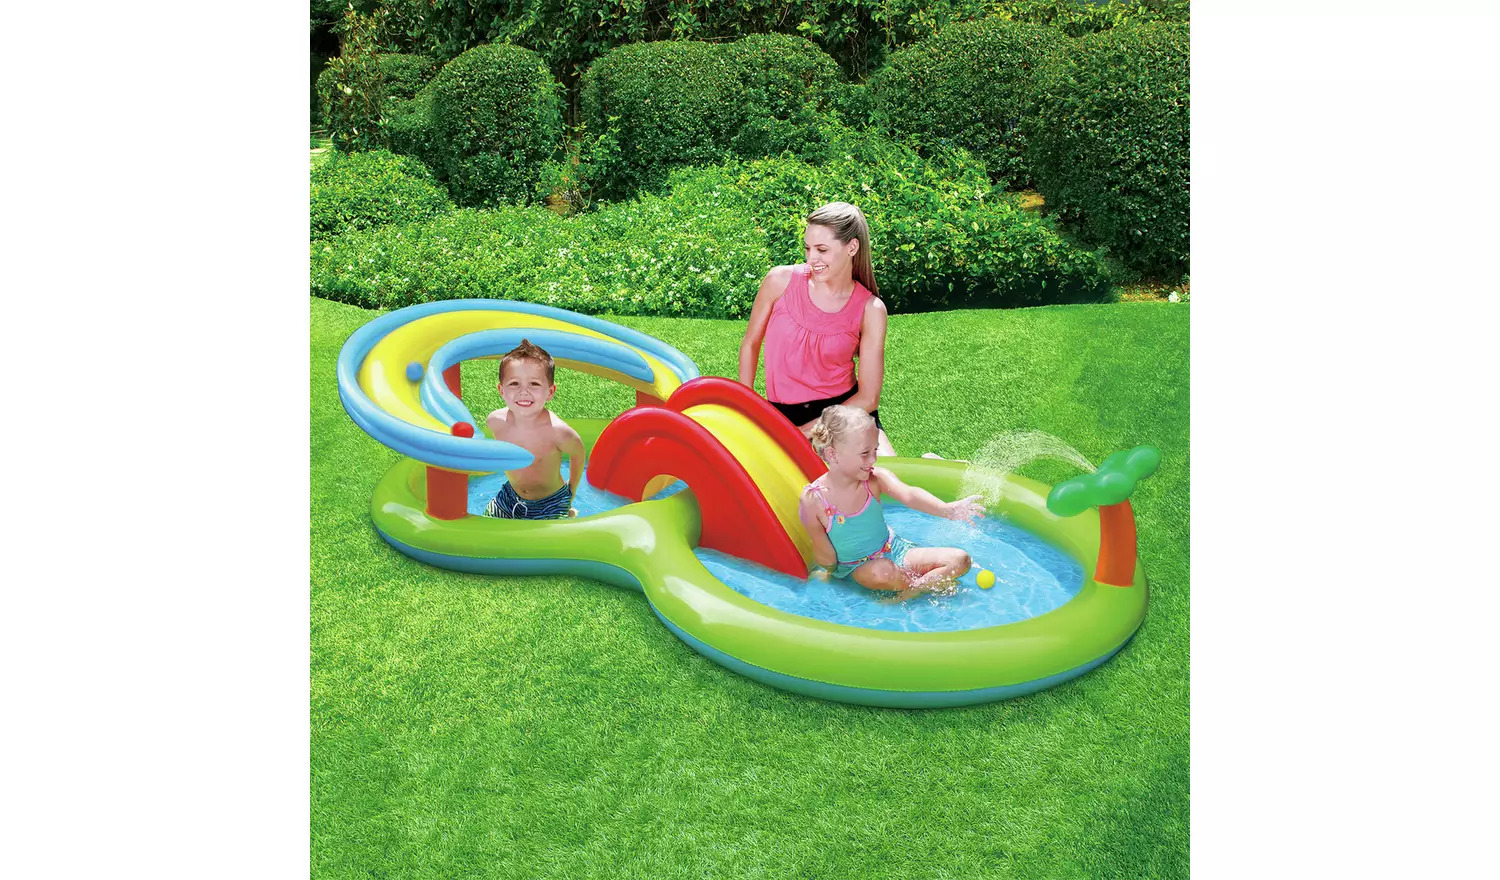 The 'Summer Waves Adventure Activity Pool Play Centre' can be snapped up for just £24